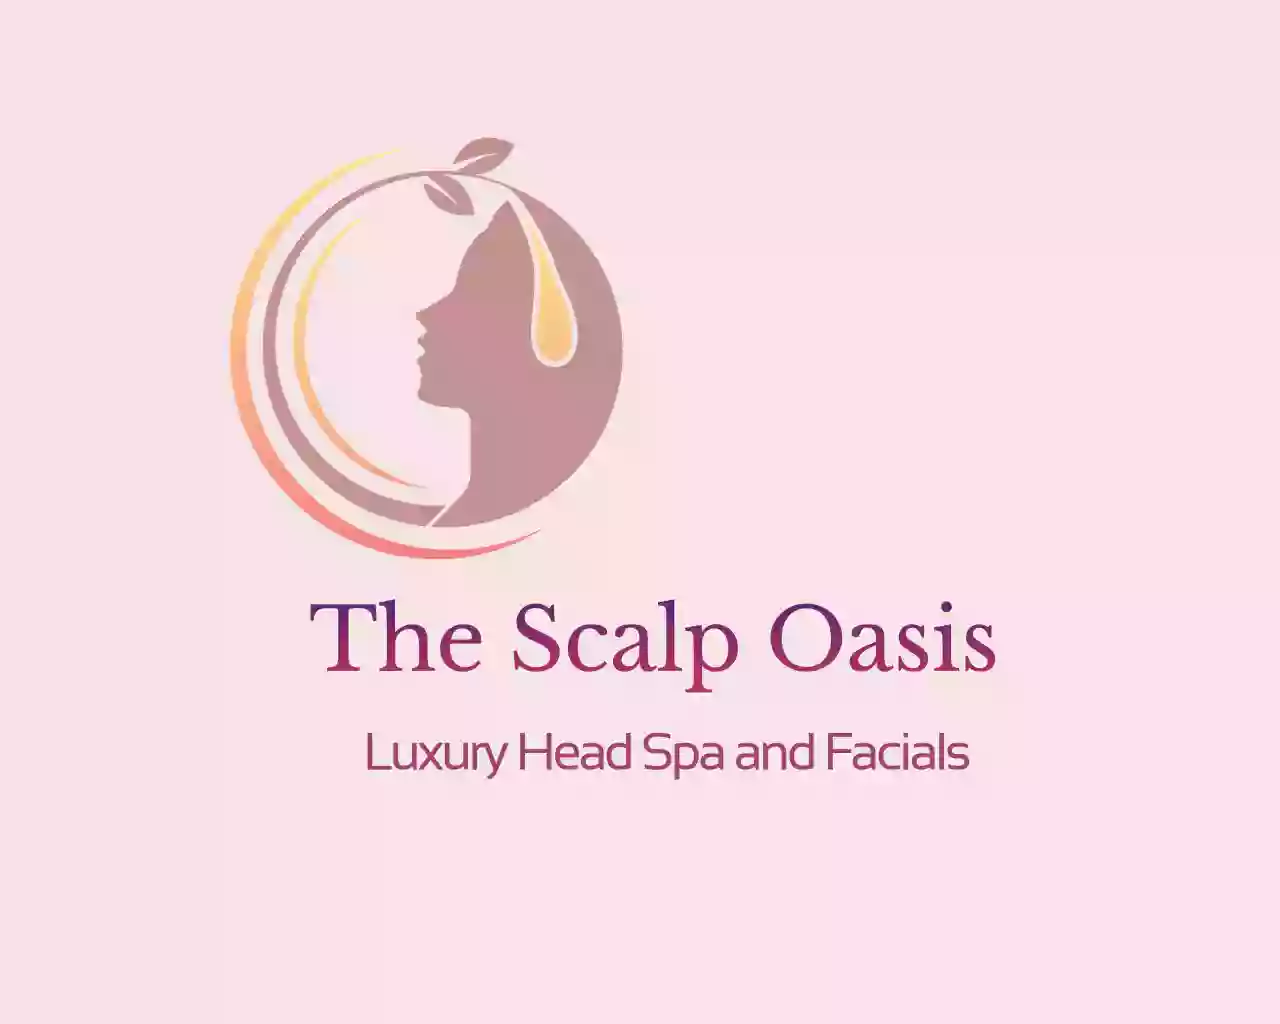 The Scalp Oasis Luxury Head Spa and Facials